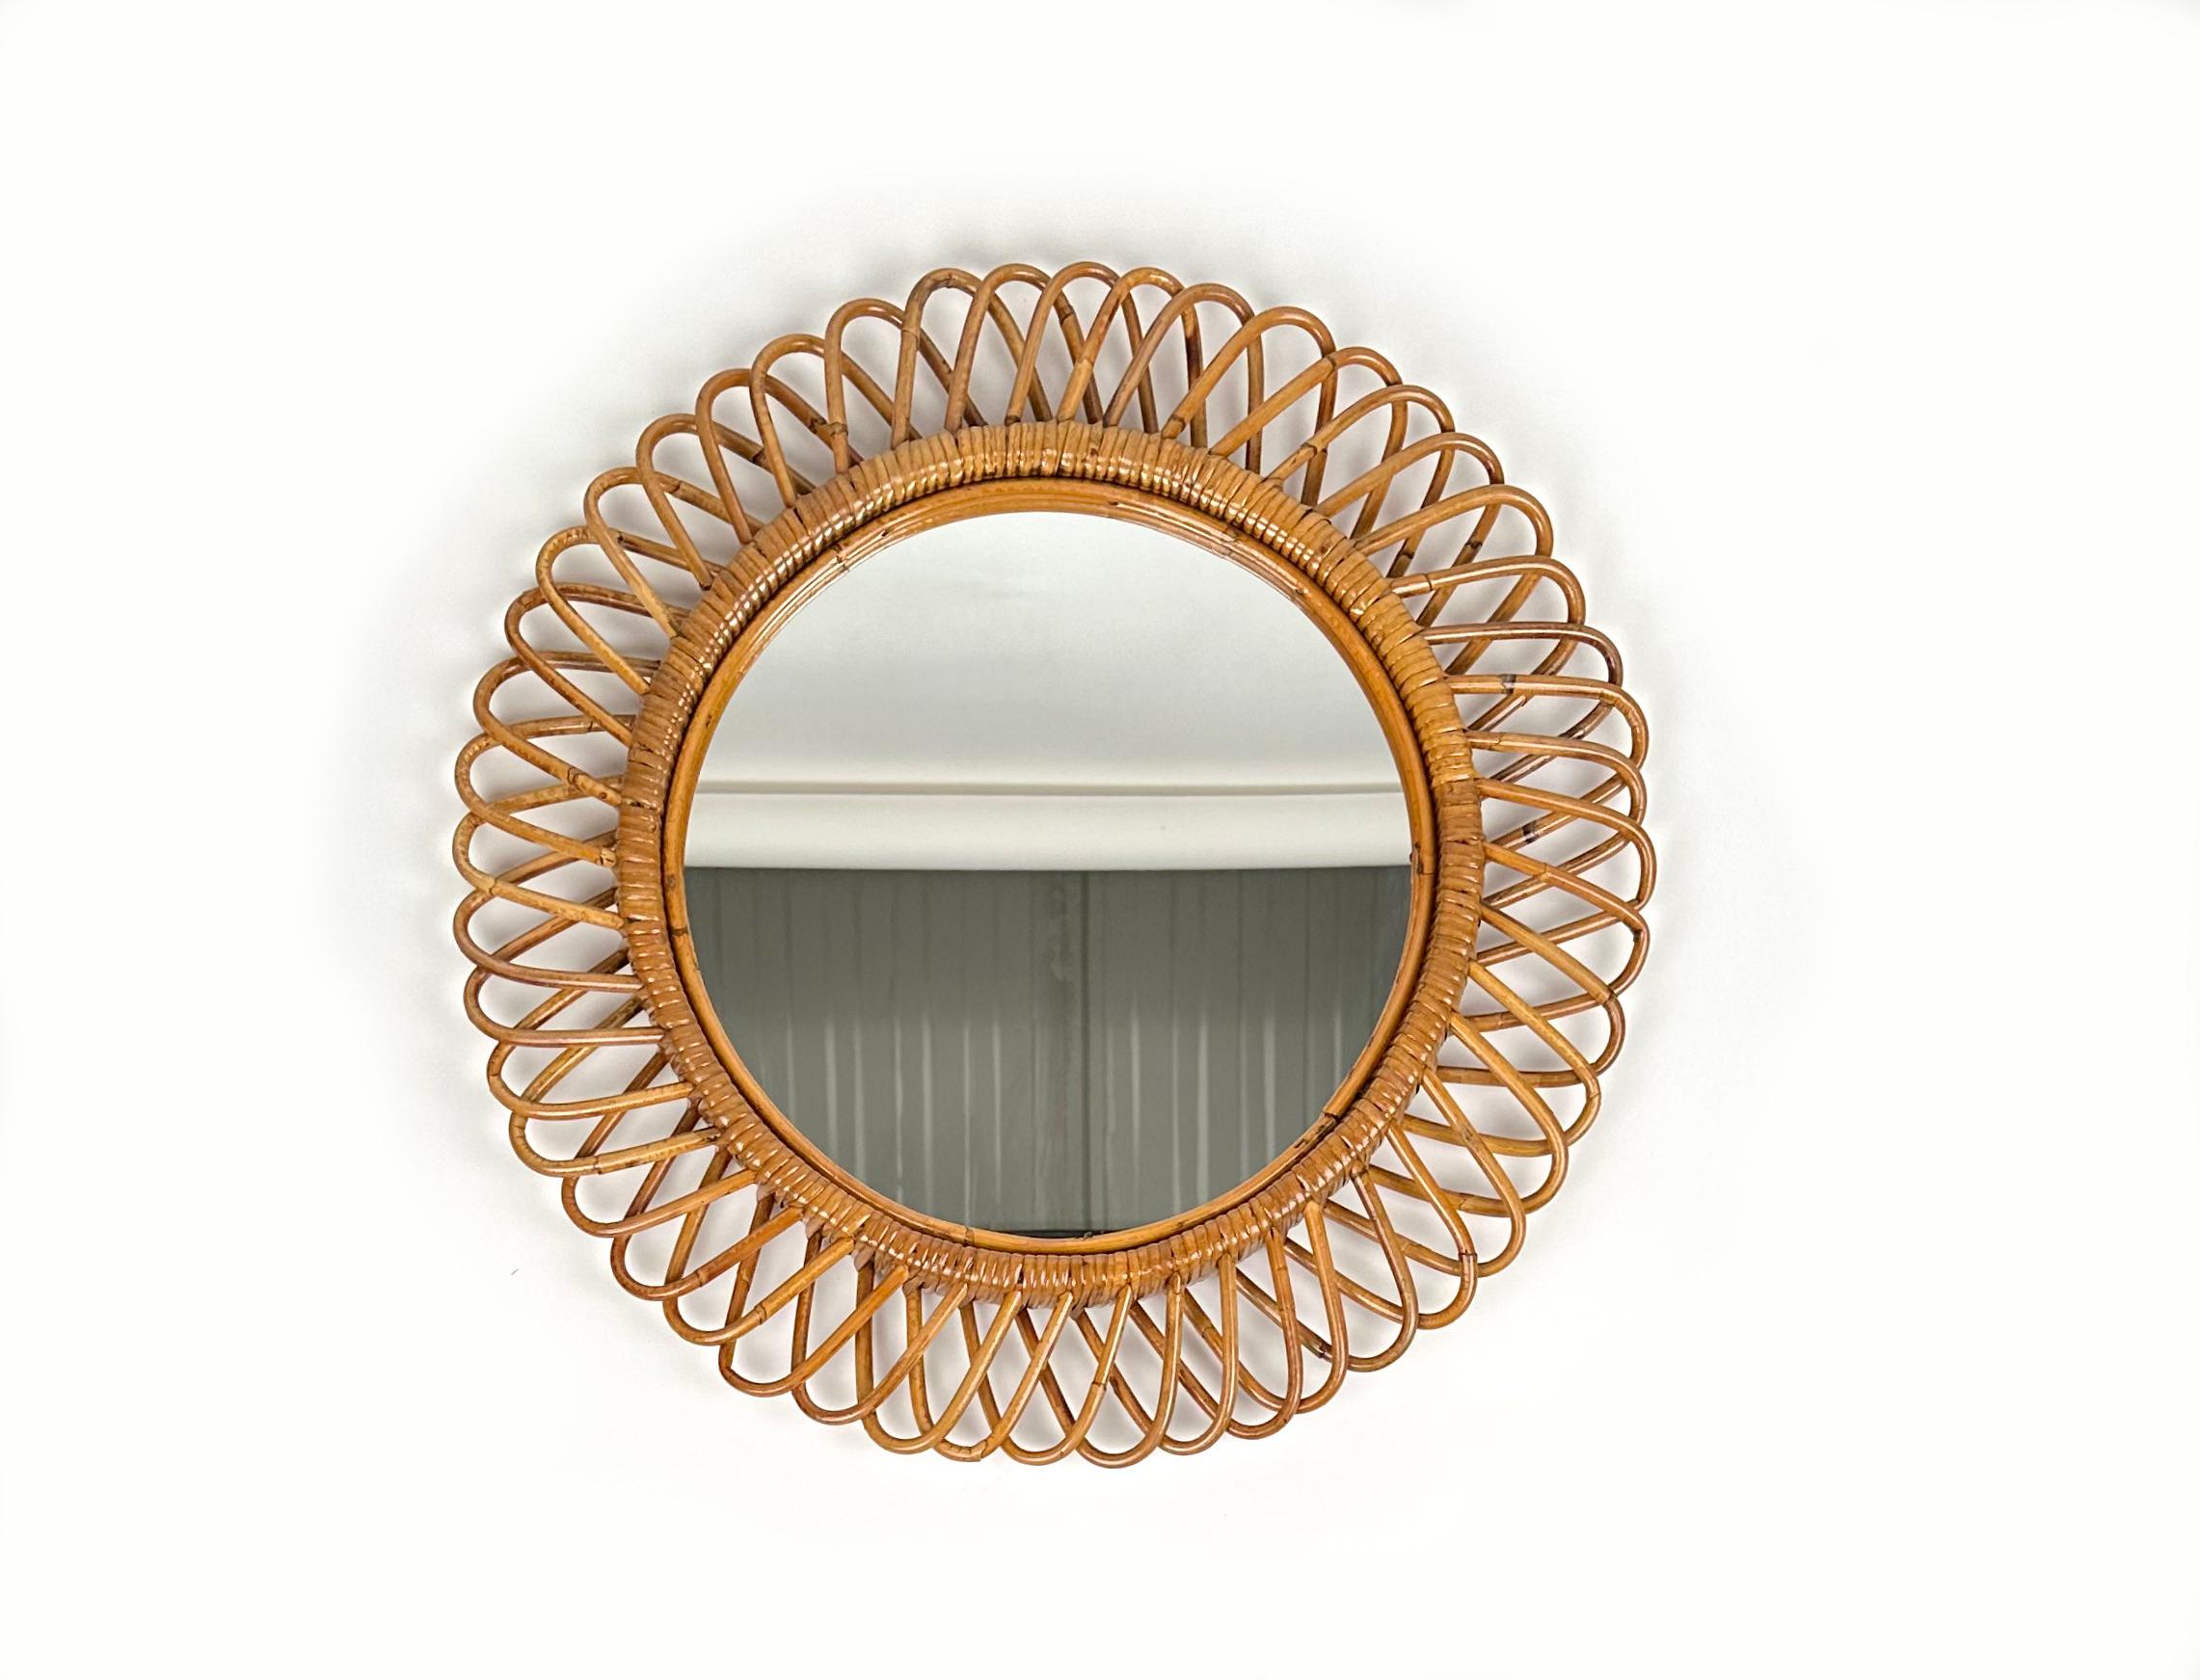 Beautiful round wall mirror in bamboo and rattan.

Made in Italy in the 1960s.